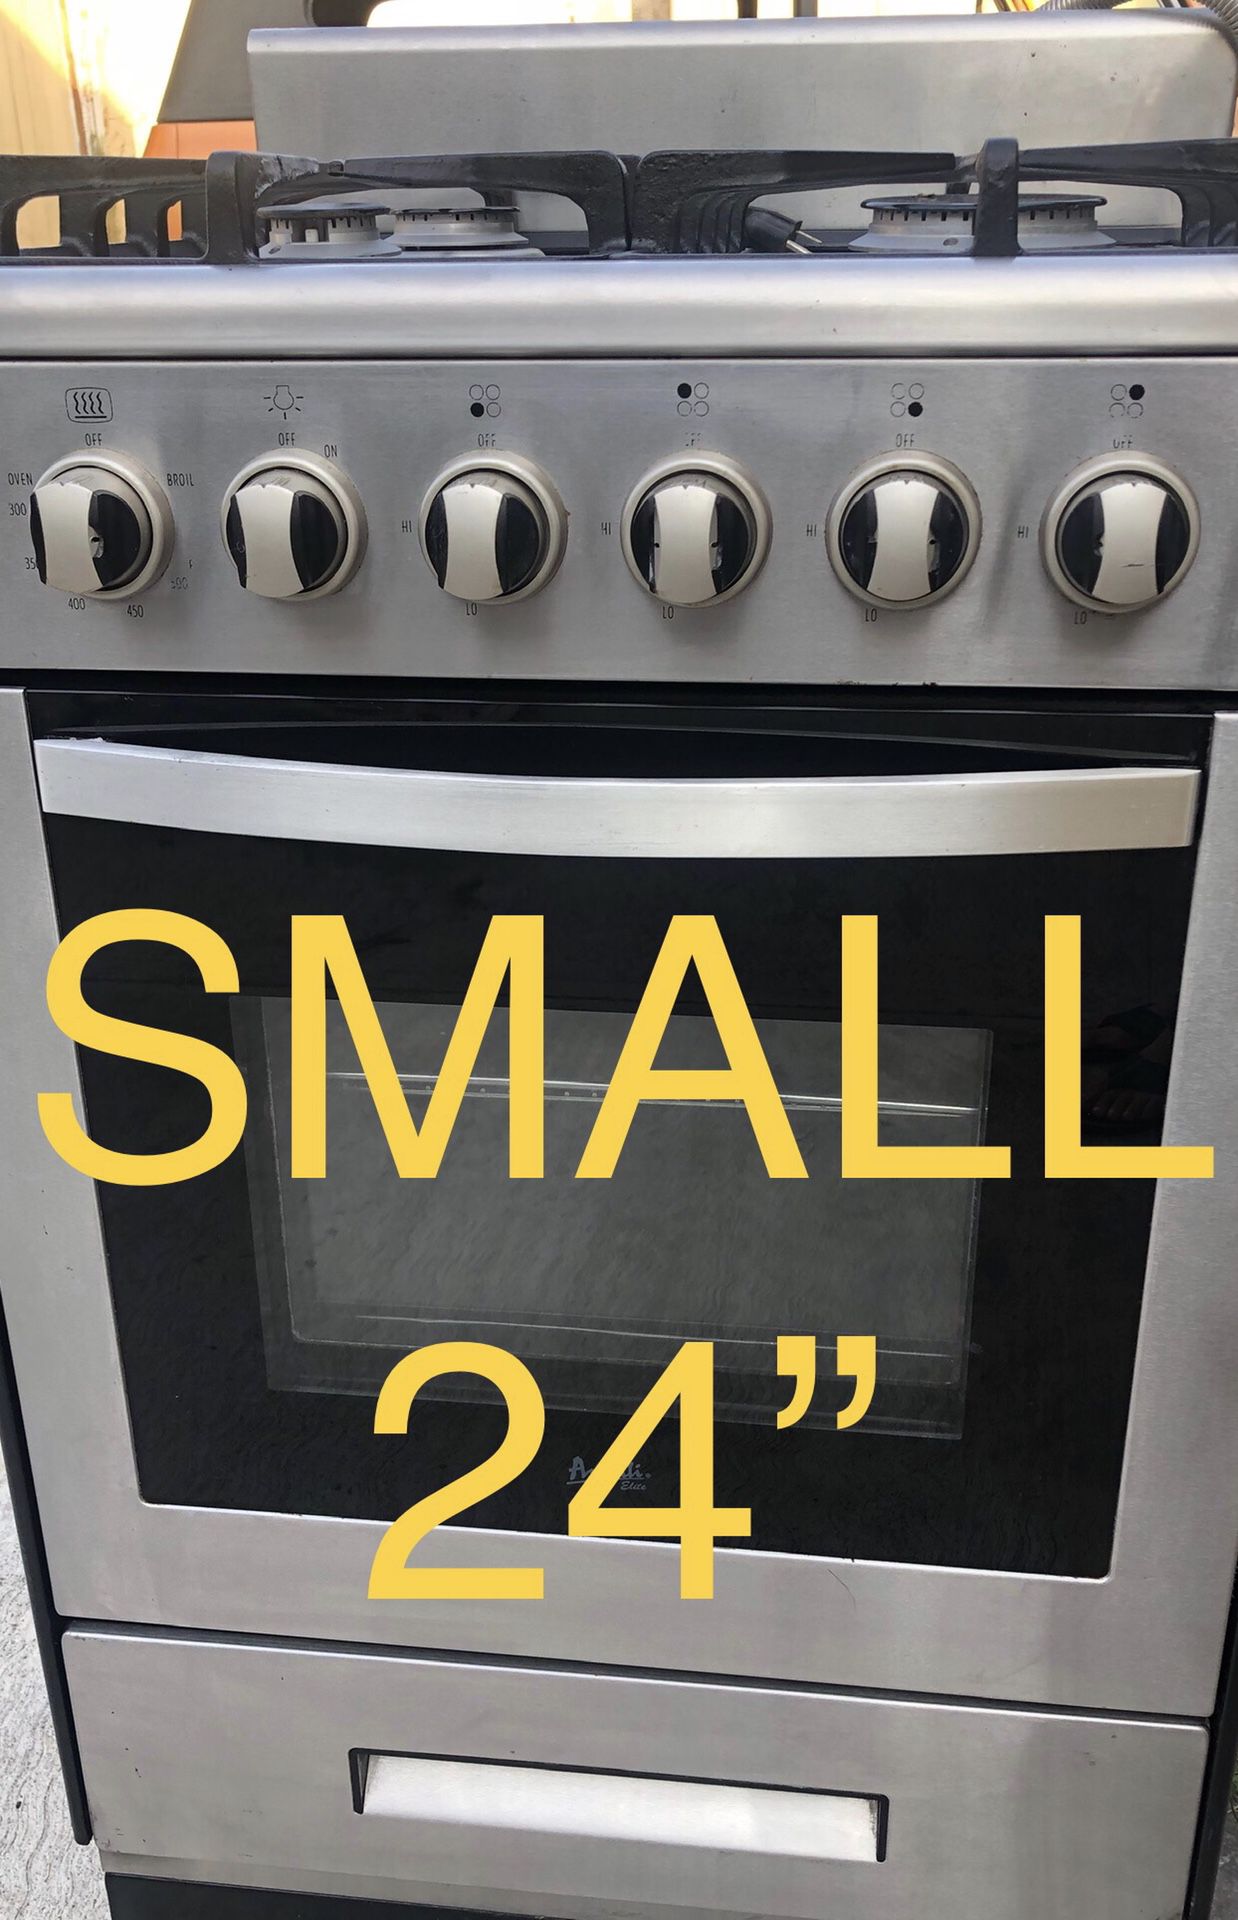 Small stove 24” wide STAINLESS STEEL